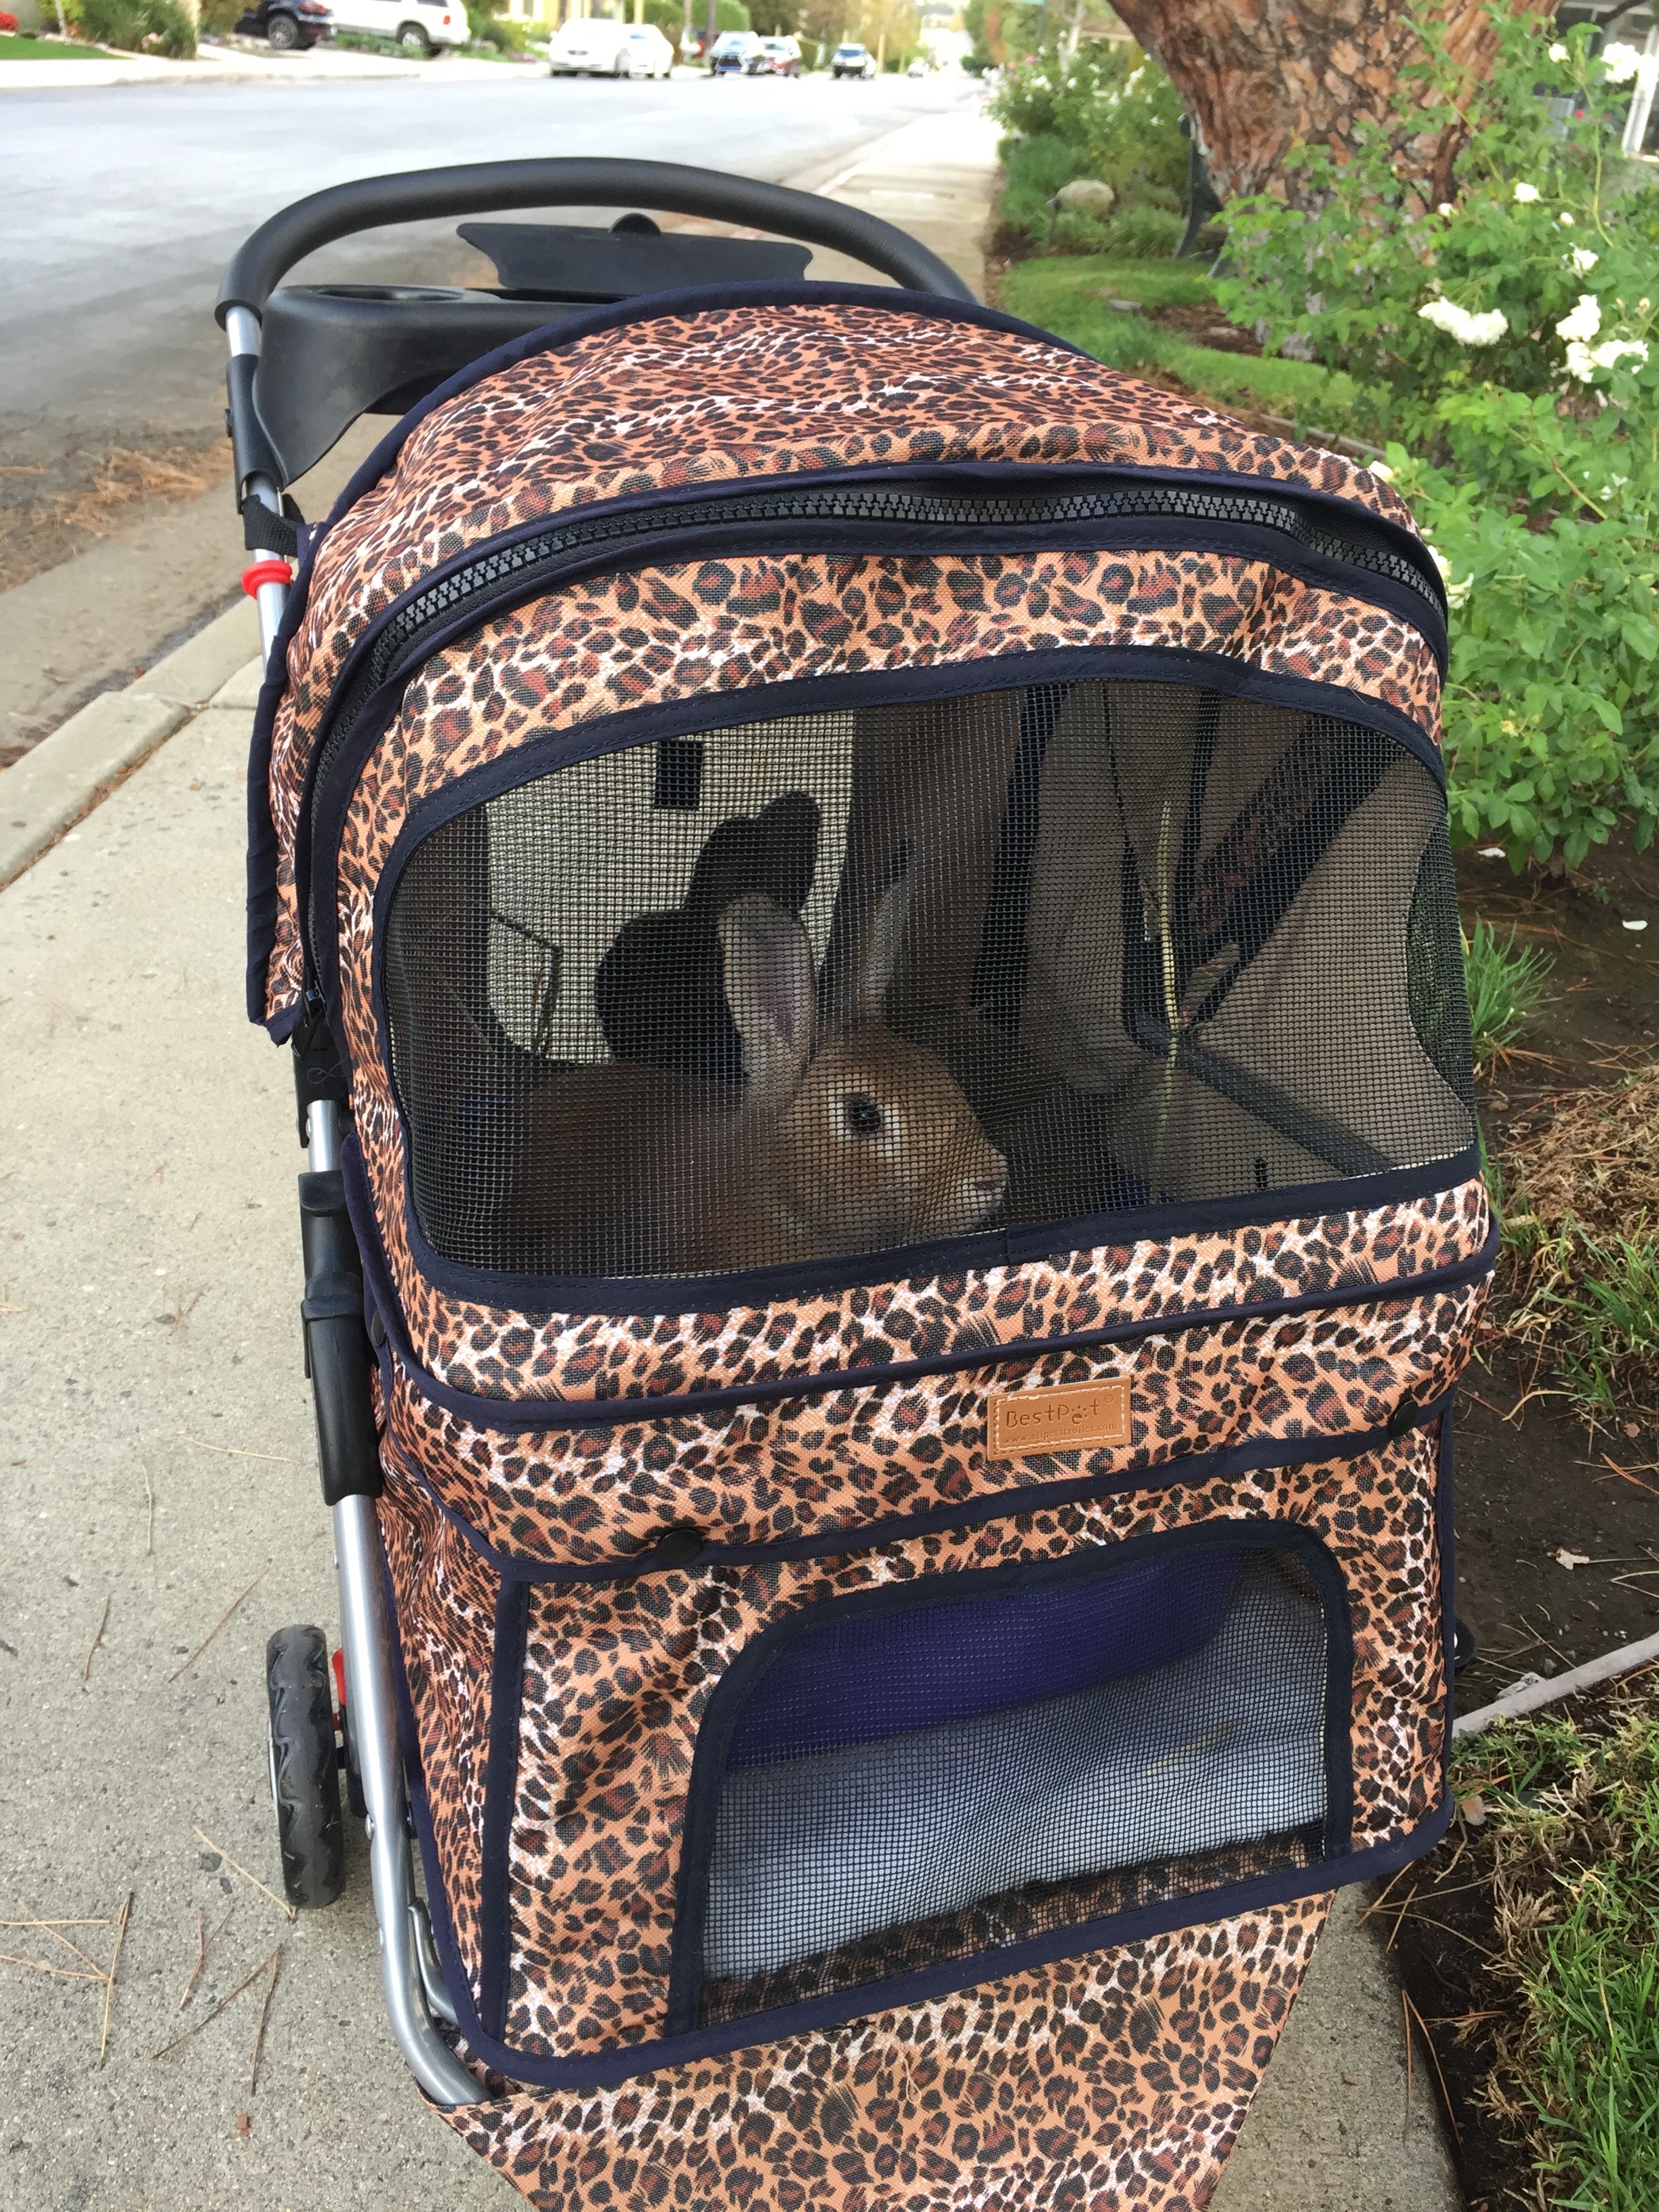 RABBIT IN CARRIAGE